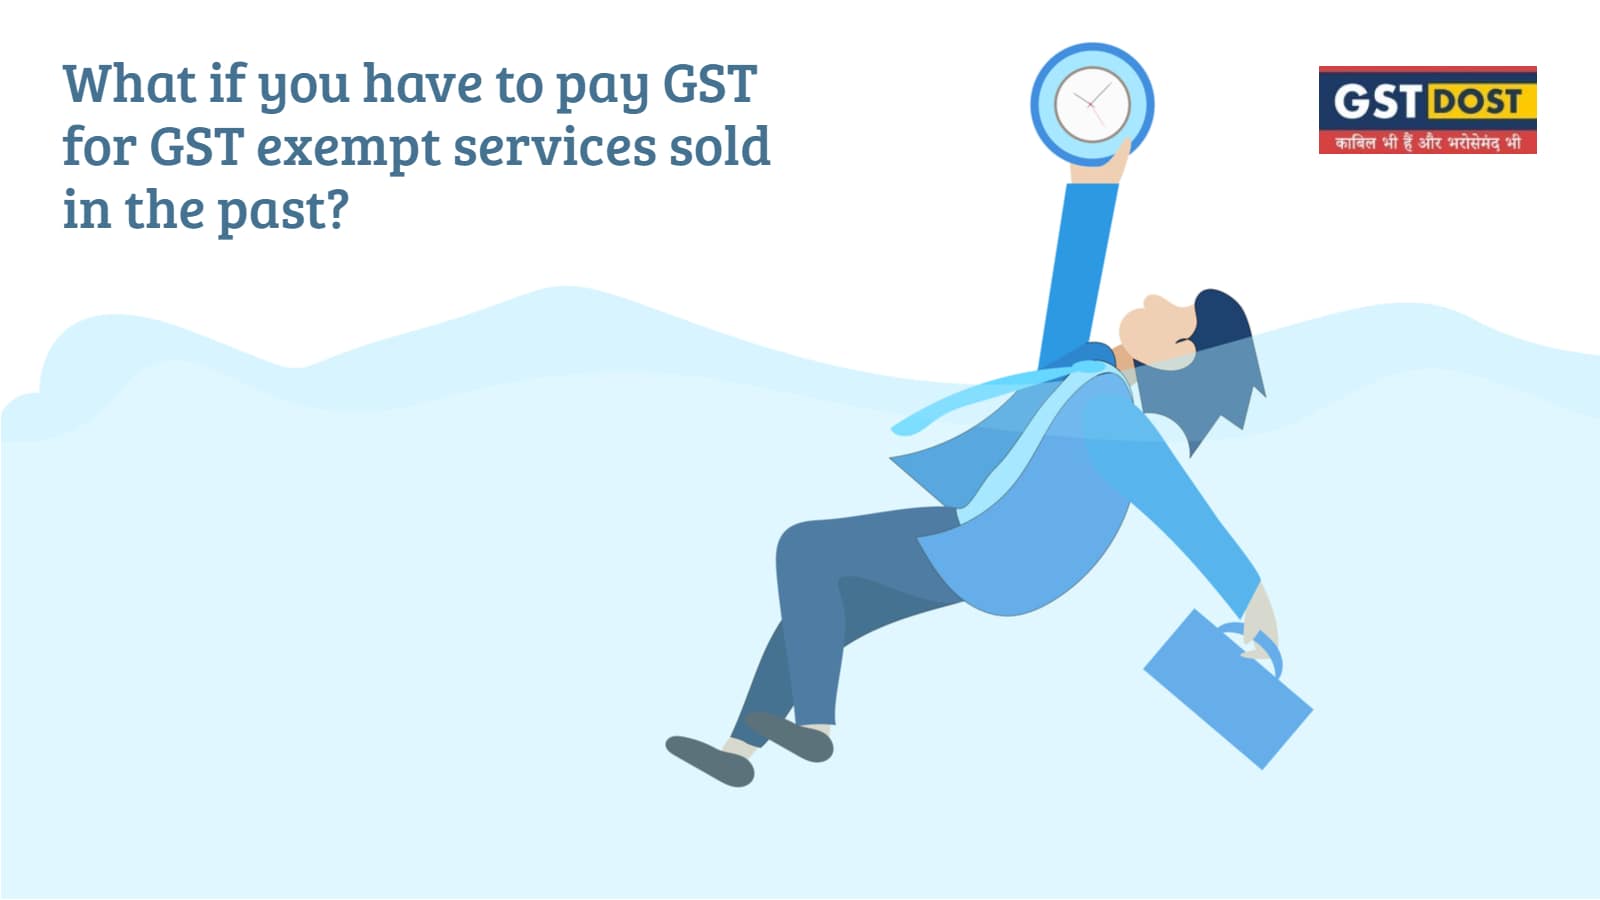 What if you have to pay GST for GST-exempt services sold in the past?